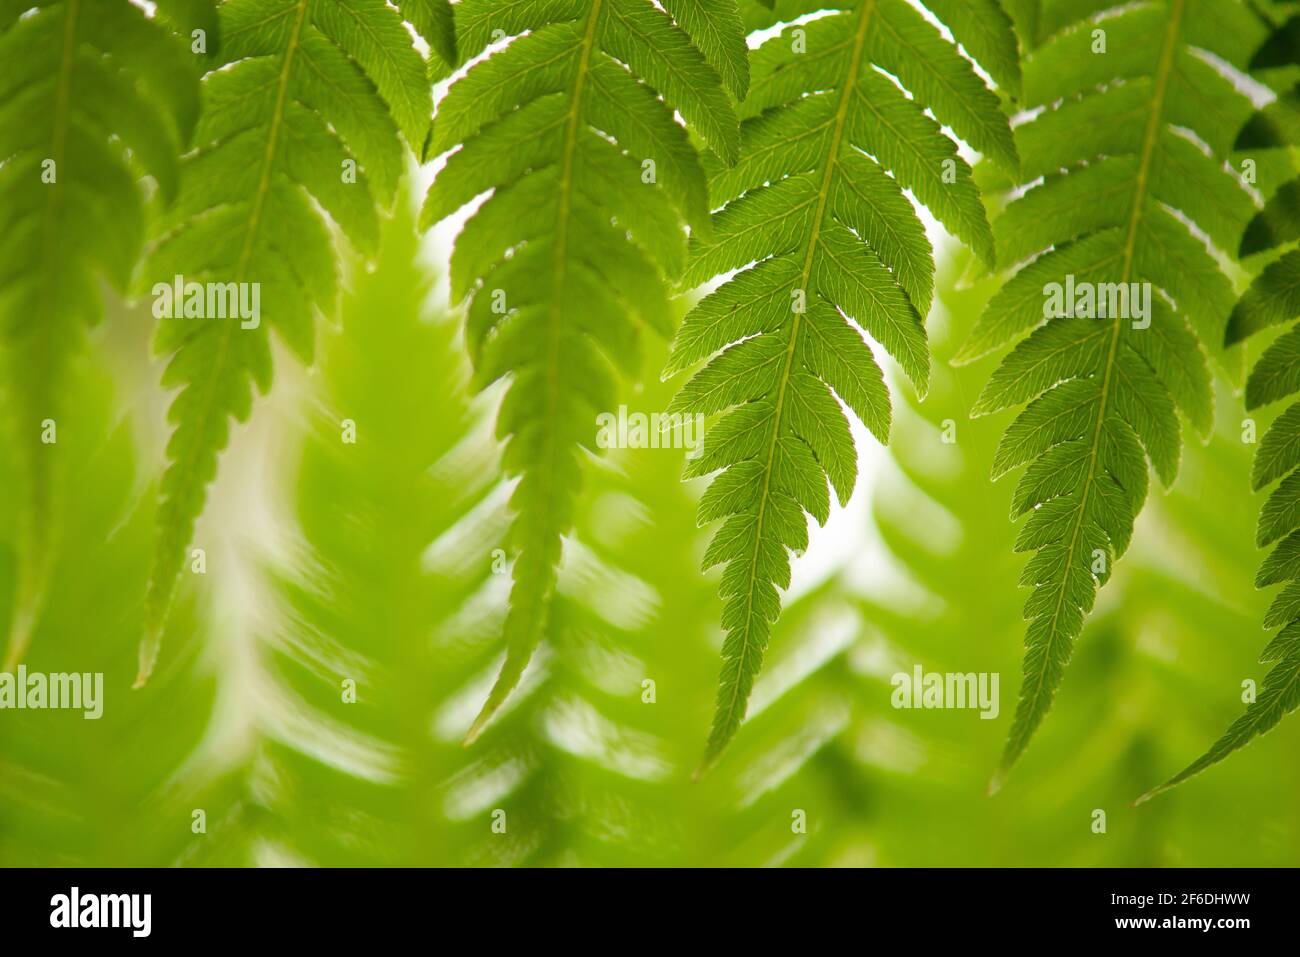 Close up of fern leafs in a bright green color Stock Photo